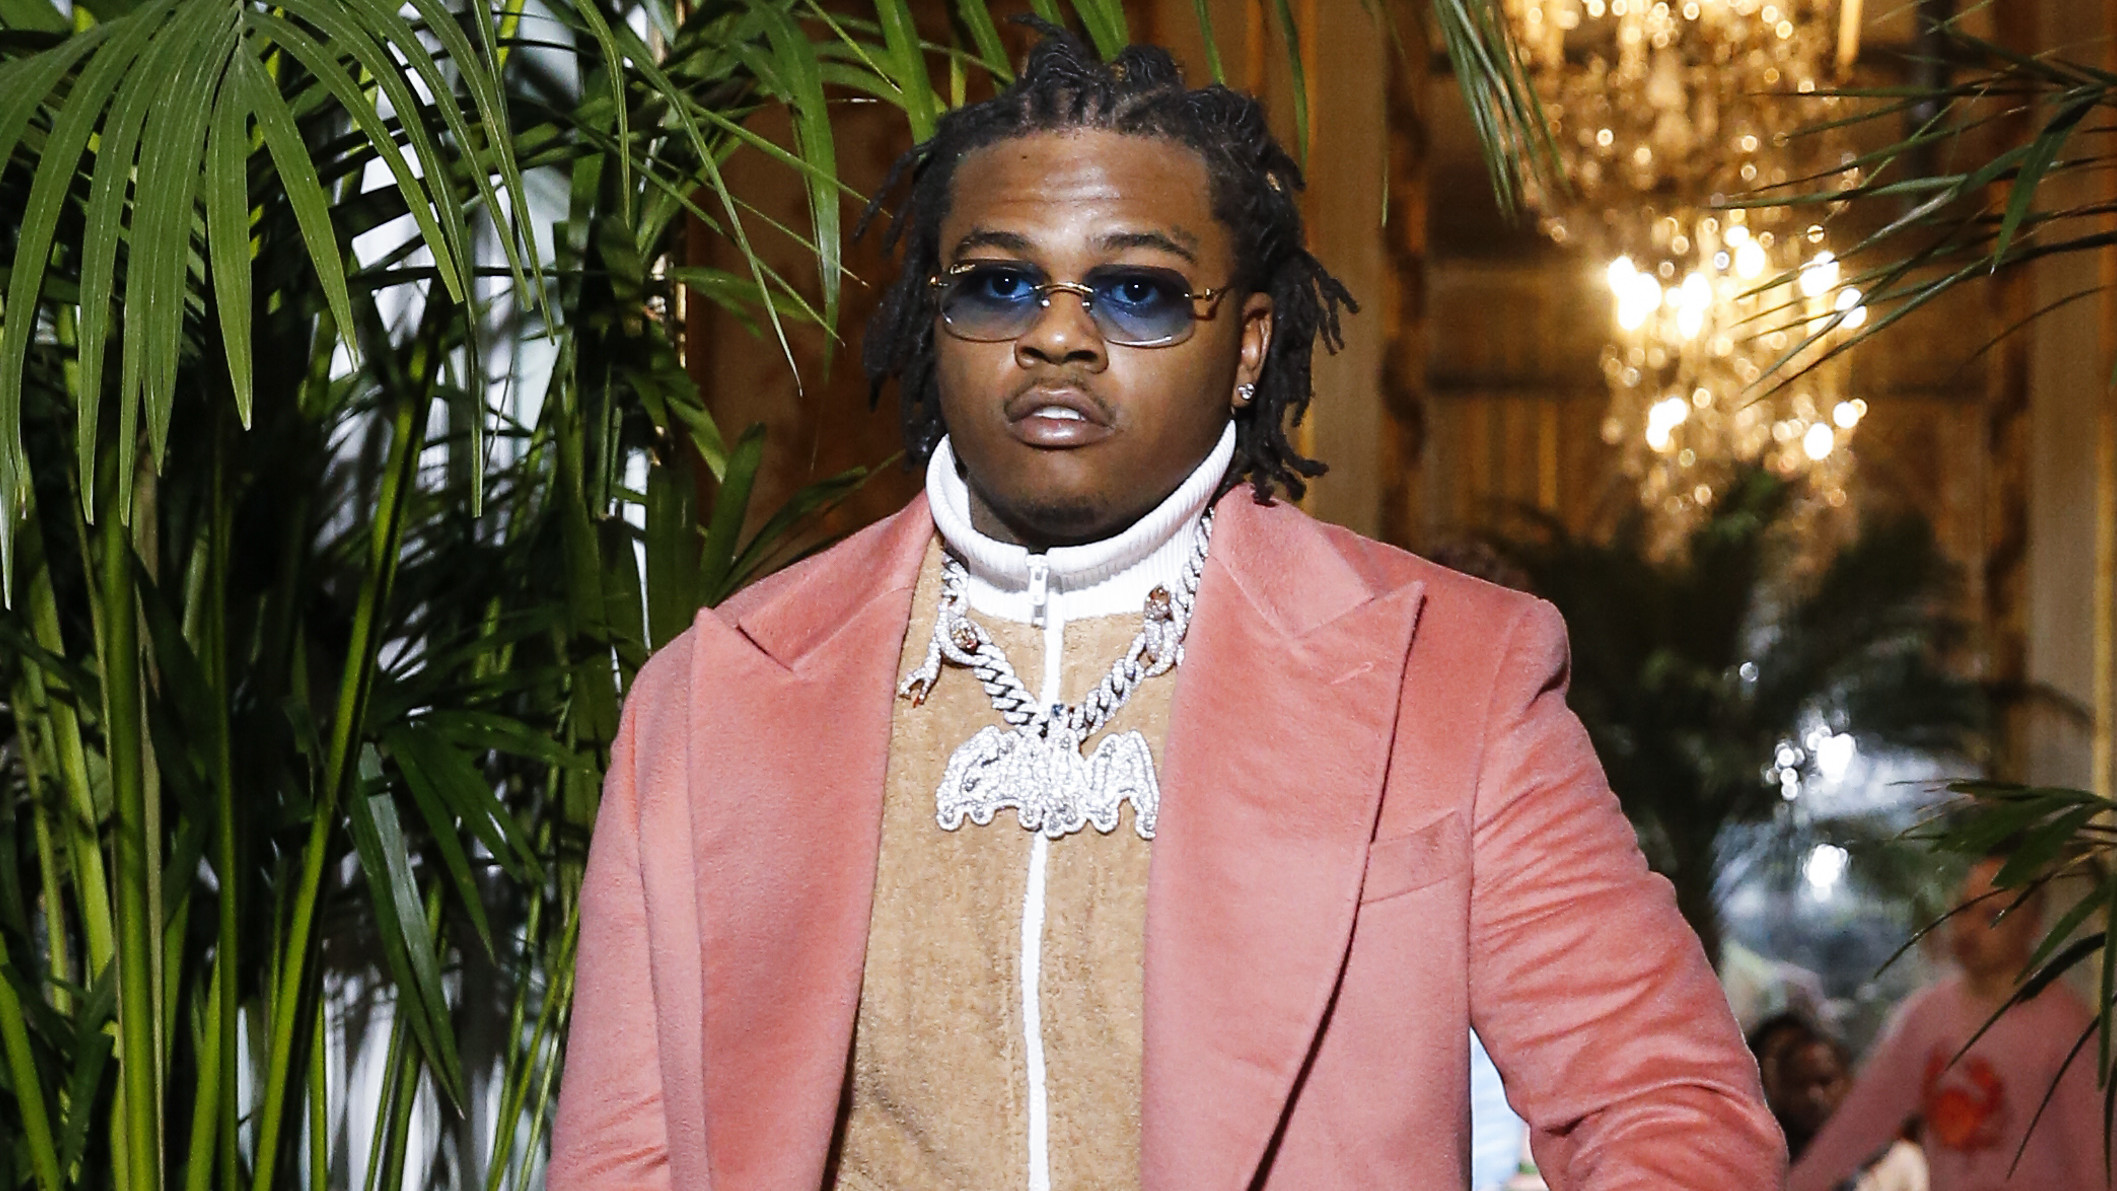 Gunna Wearing LV Sunglasses And Jacket With Jordan 1s & an